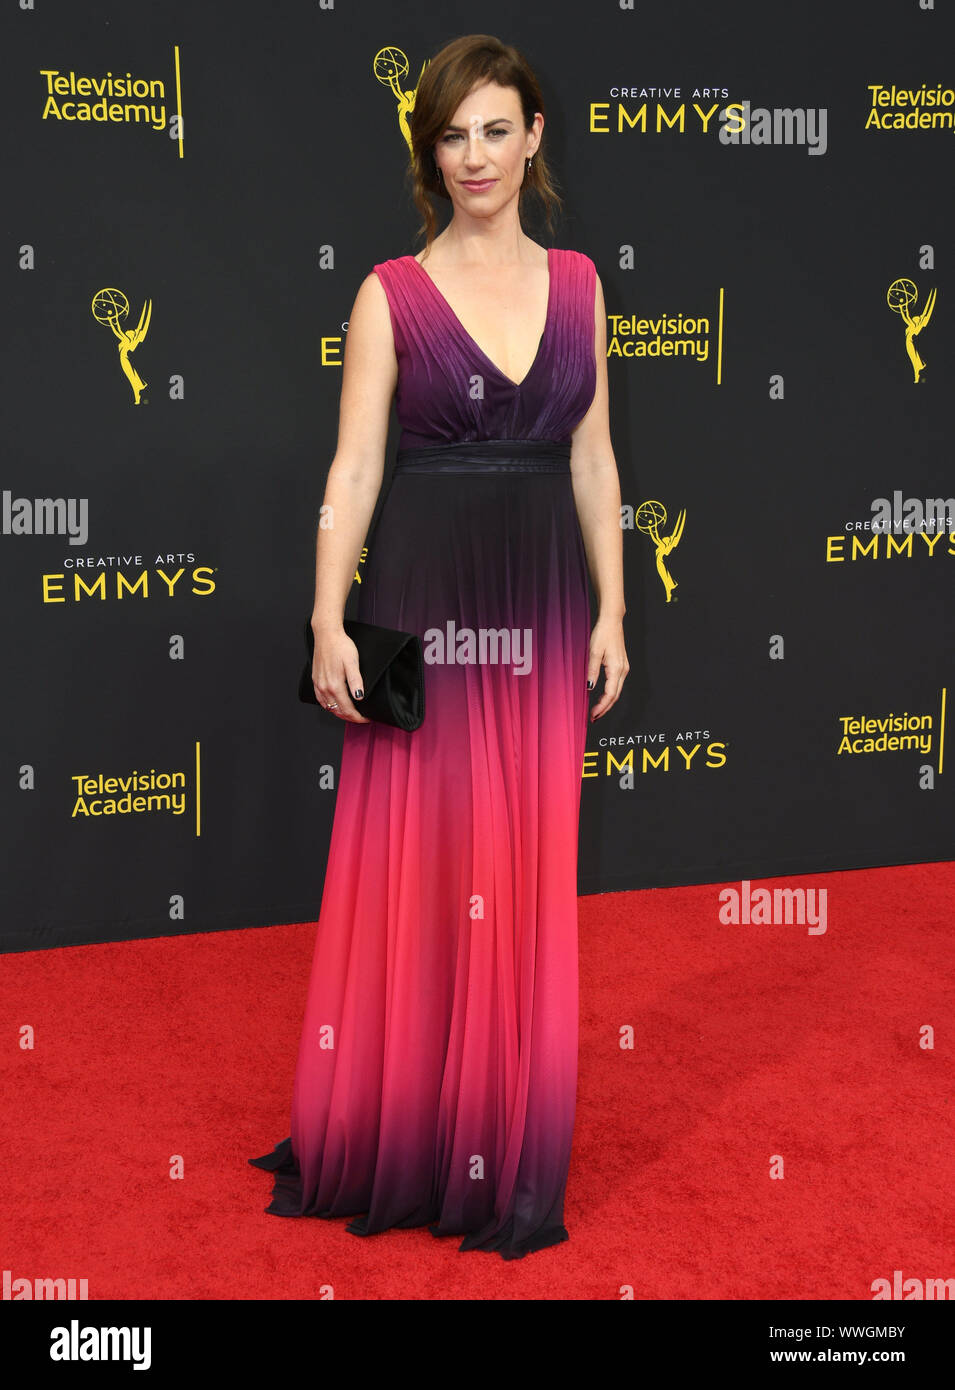 September 15, 2019, Los Angeles, California, USA: Maggie Siff at 2019 Creative Arts Emmys Awards - Arrivals held at Microsoft Theater L.A. Live. (Credit Image: © Birdie Thompson/AdMedia via ZUMA Wire) Stock Photo